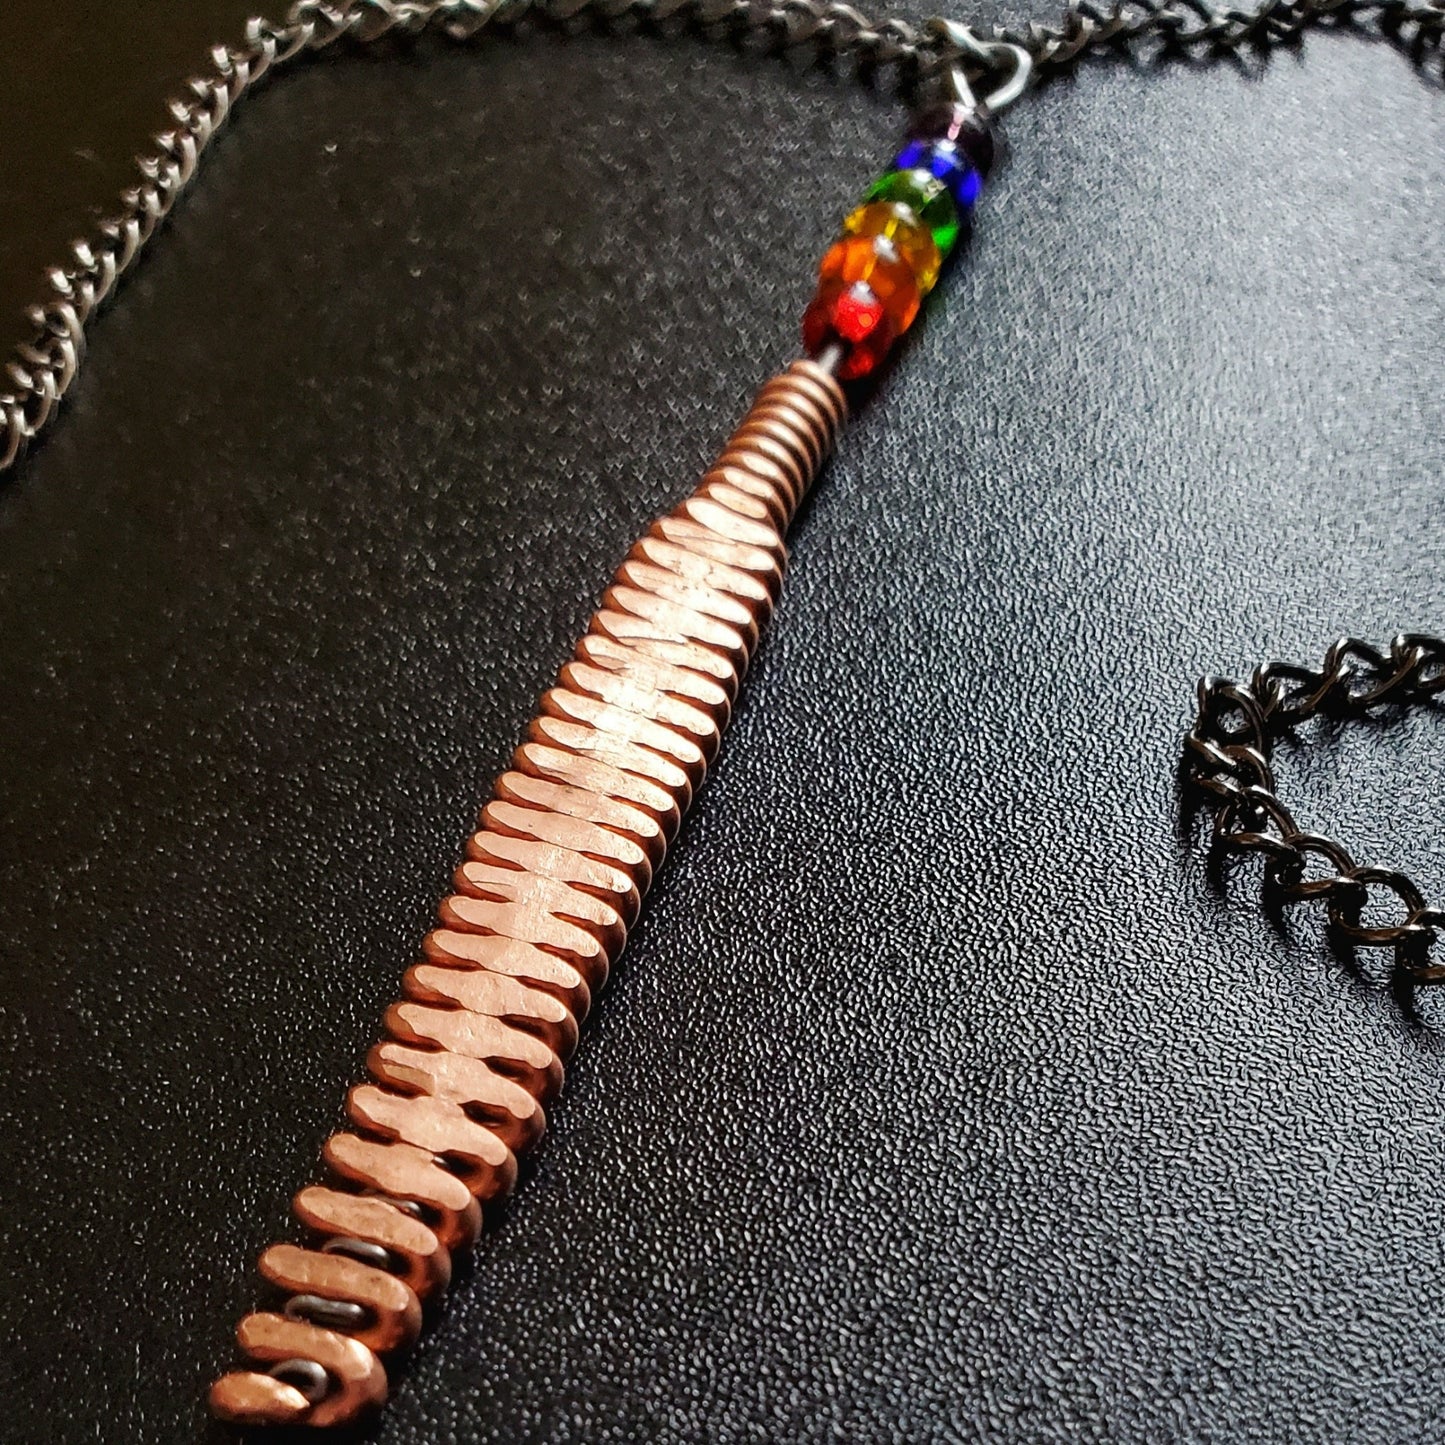 Hammered piano string pendant with 6 LGBTQ flag coloured beads with chain on a piano black background 